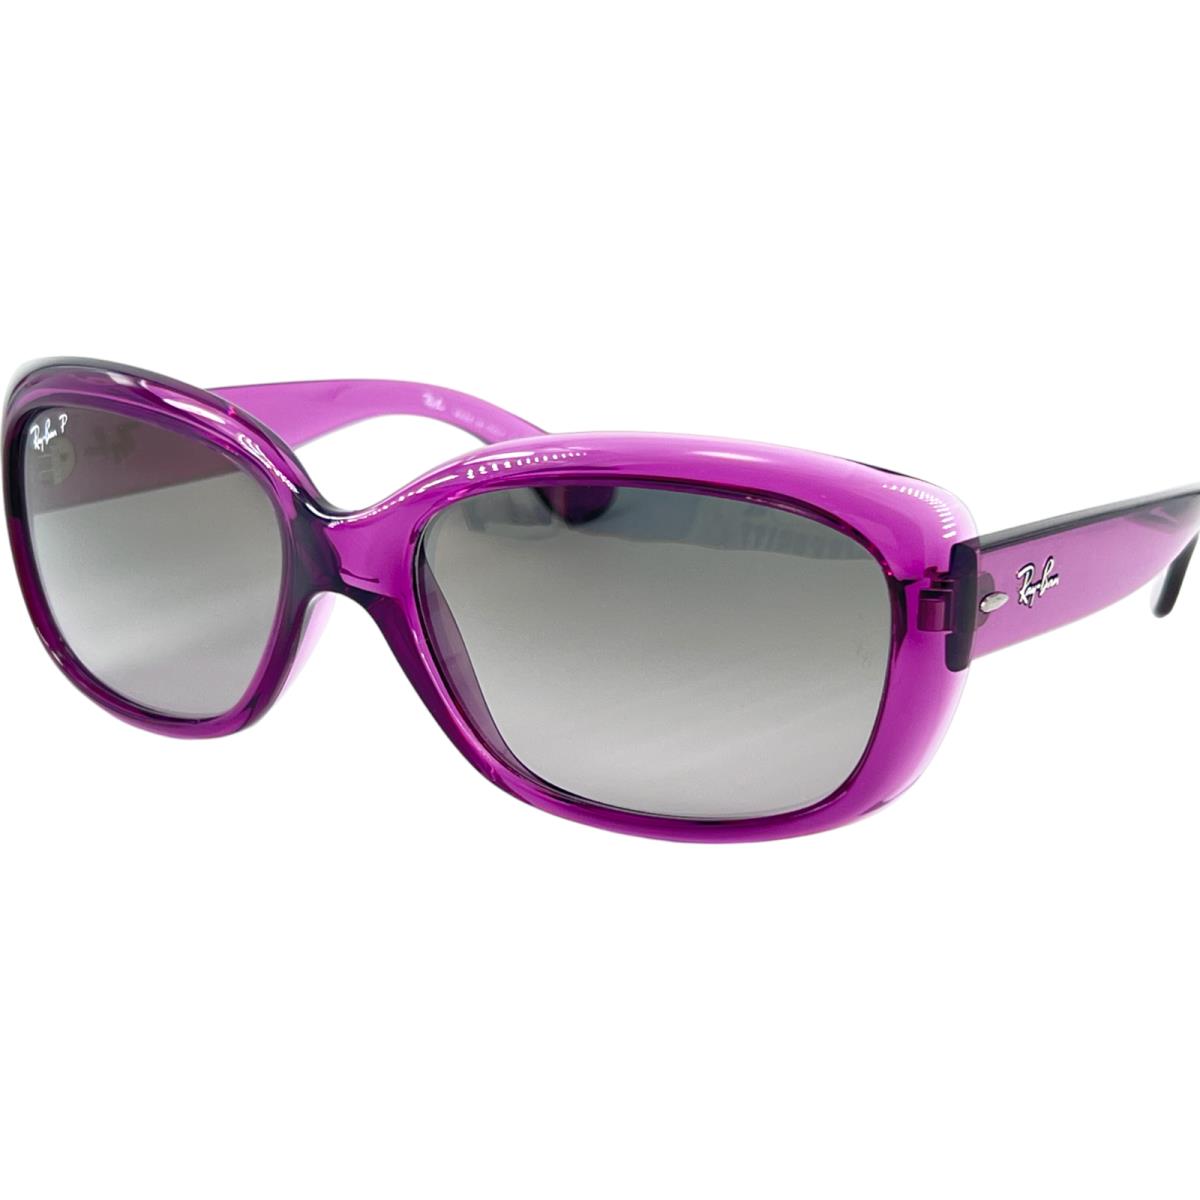 Ray-ban RB4104 Jackie Ohh Women`s Plastic Polarized Sunglass 6591M3 Violet 58-17 - Frame: Purple, Lens: Gray